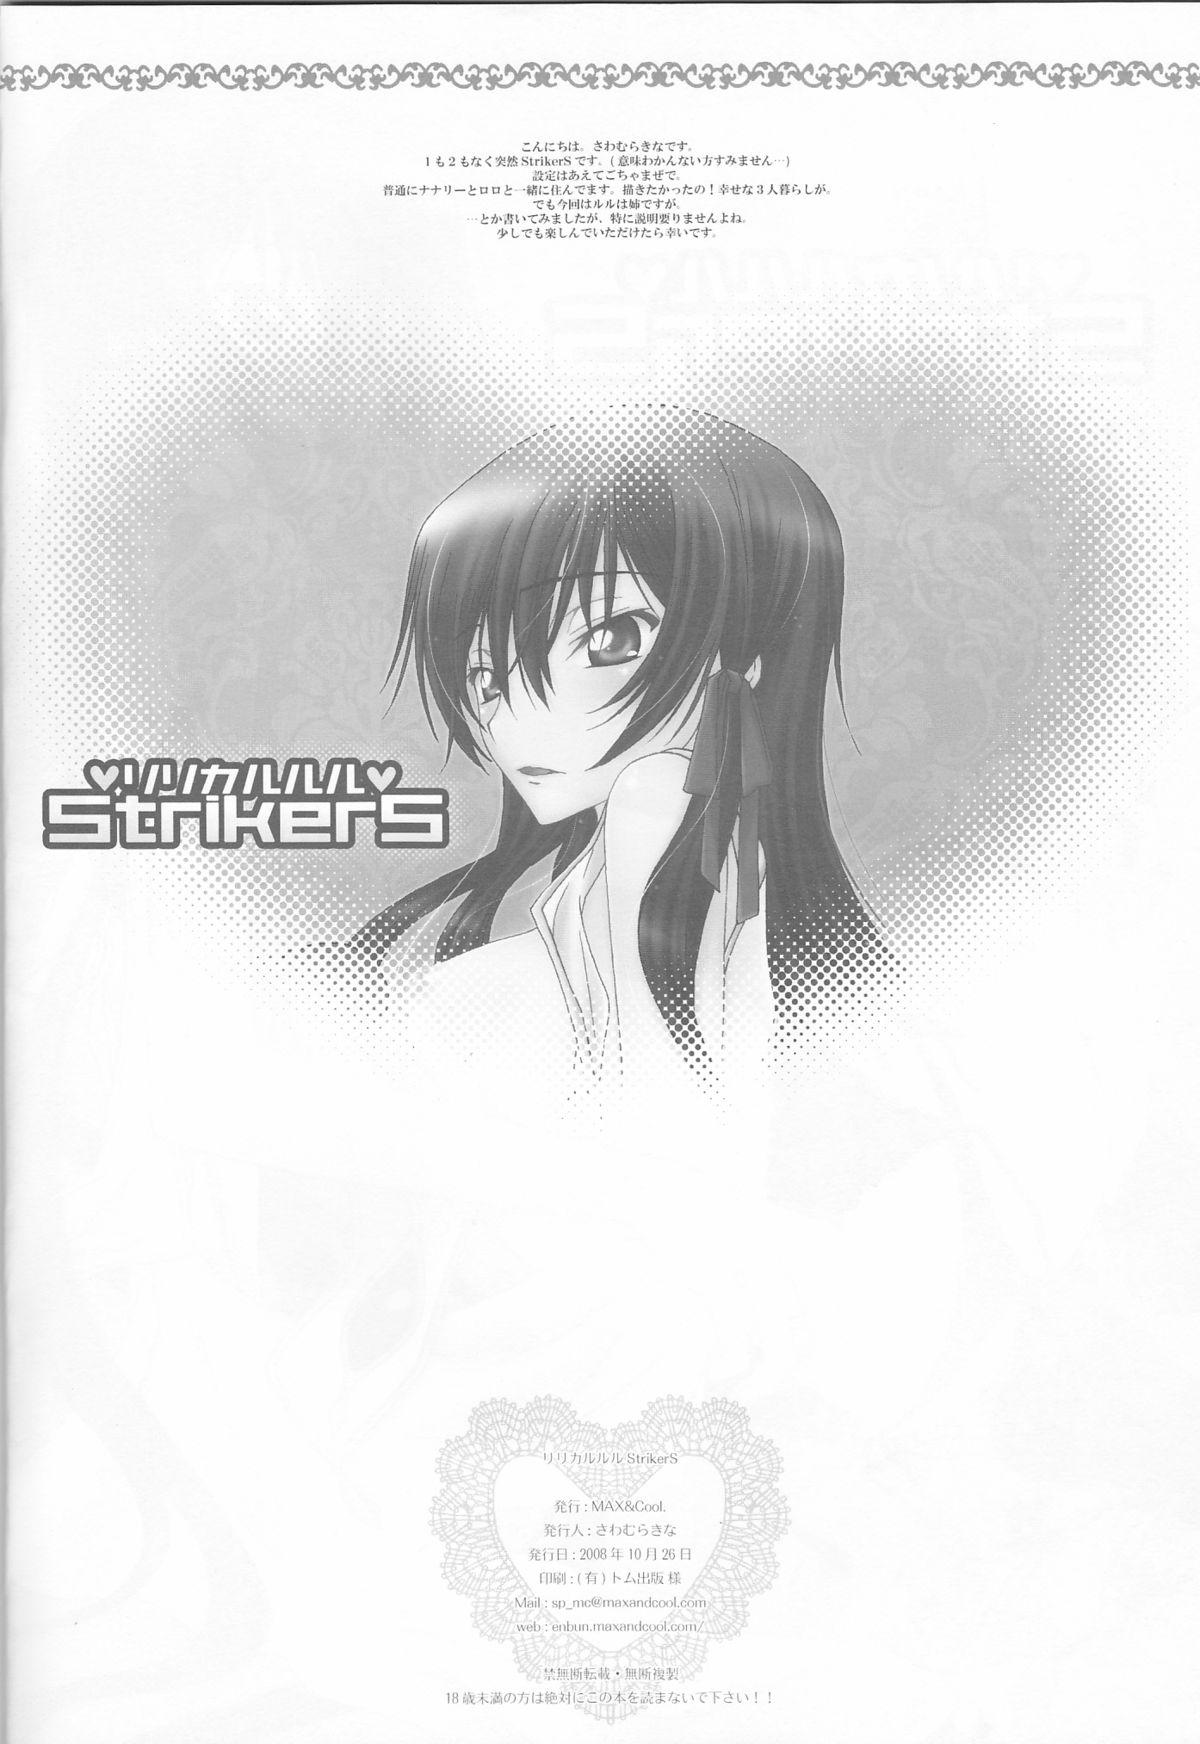 Moan Lyrical Rule StrikerS - Code geass Ethnic - Page 4